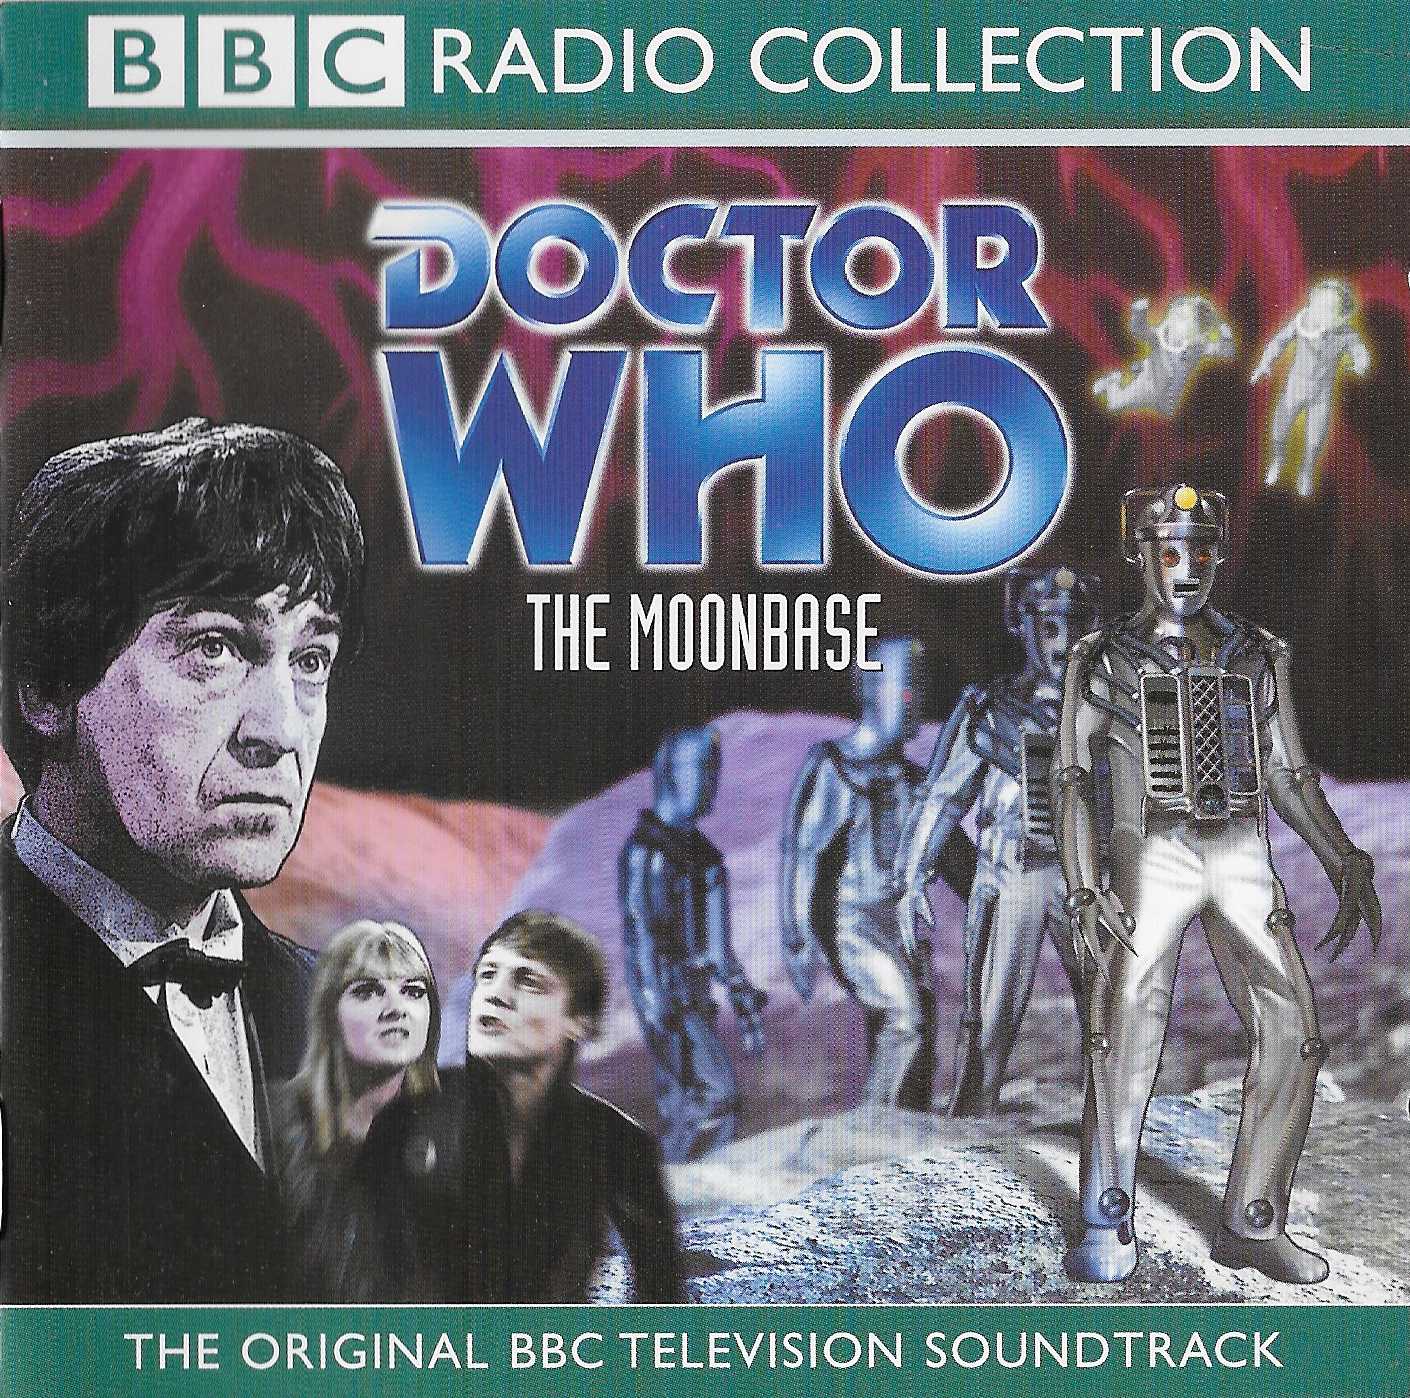 Picture of Doctor Who - The Moonbase by artist Kit Pedler from the BBC cds - Records and Tapes library